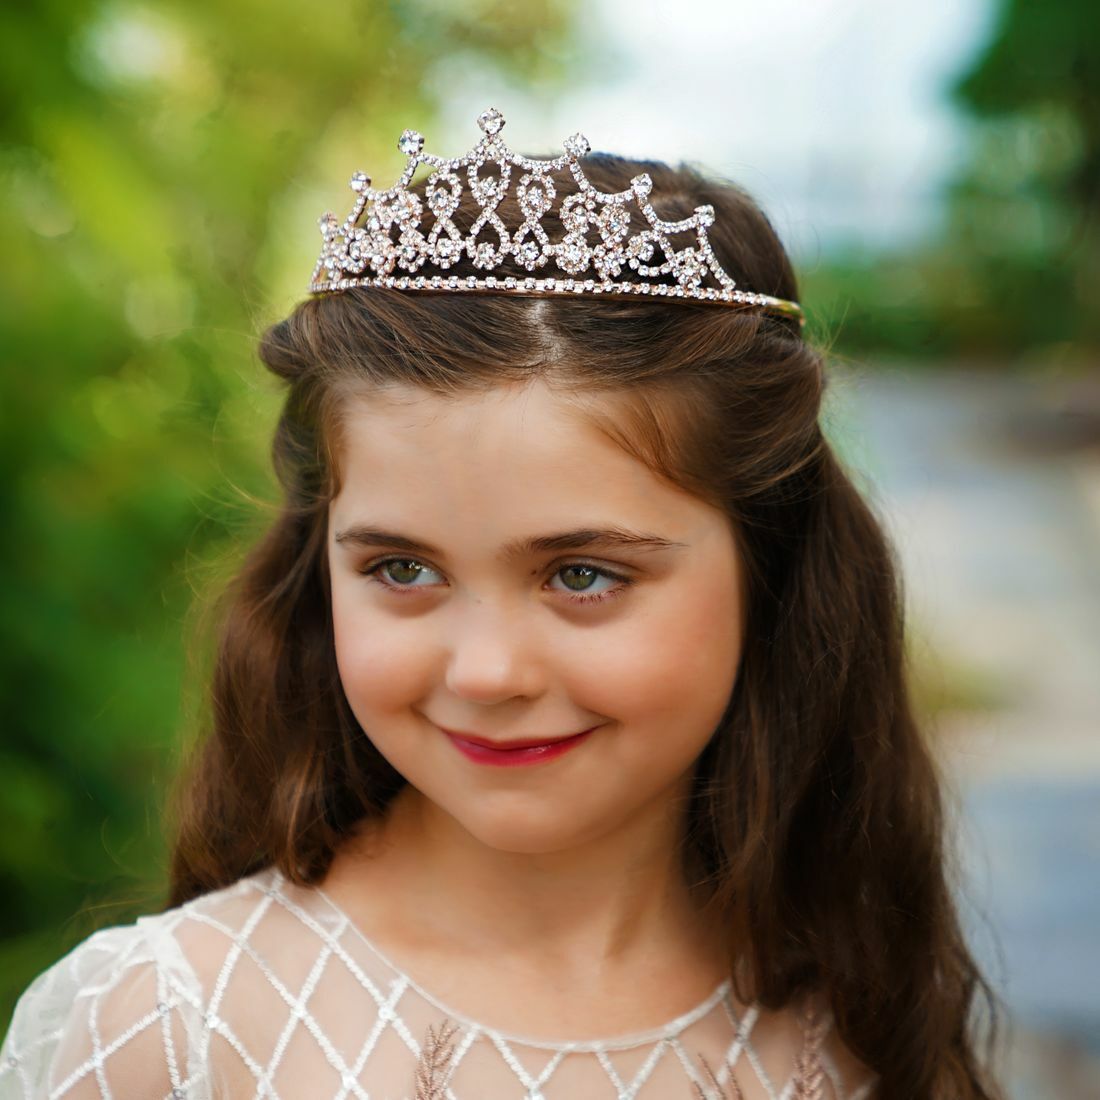 How to Make Your Princess Feel Like Royalty on Her Birthday